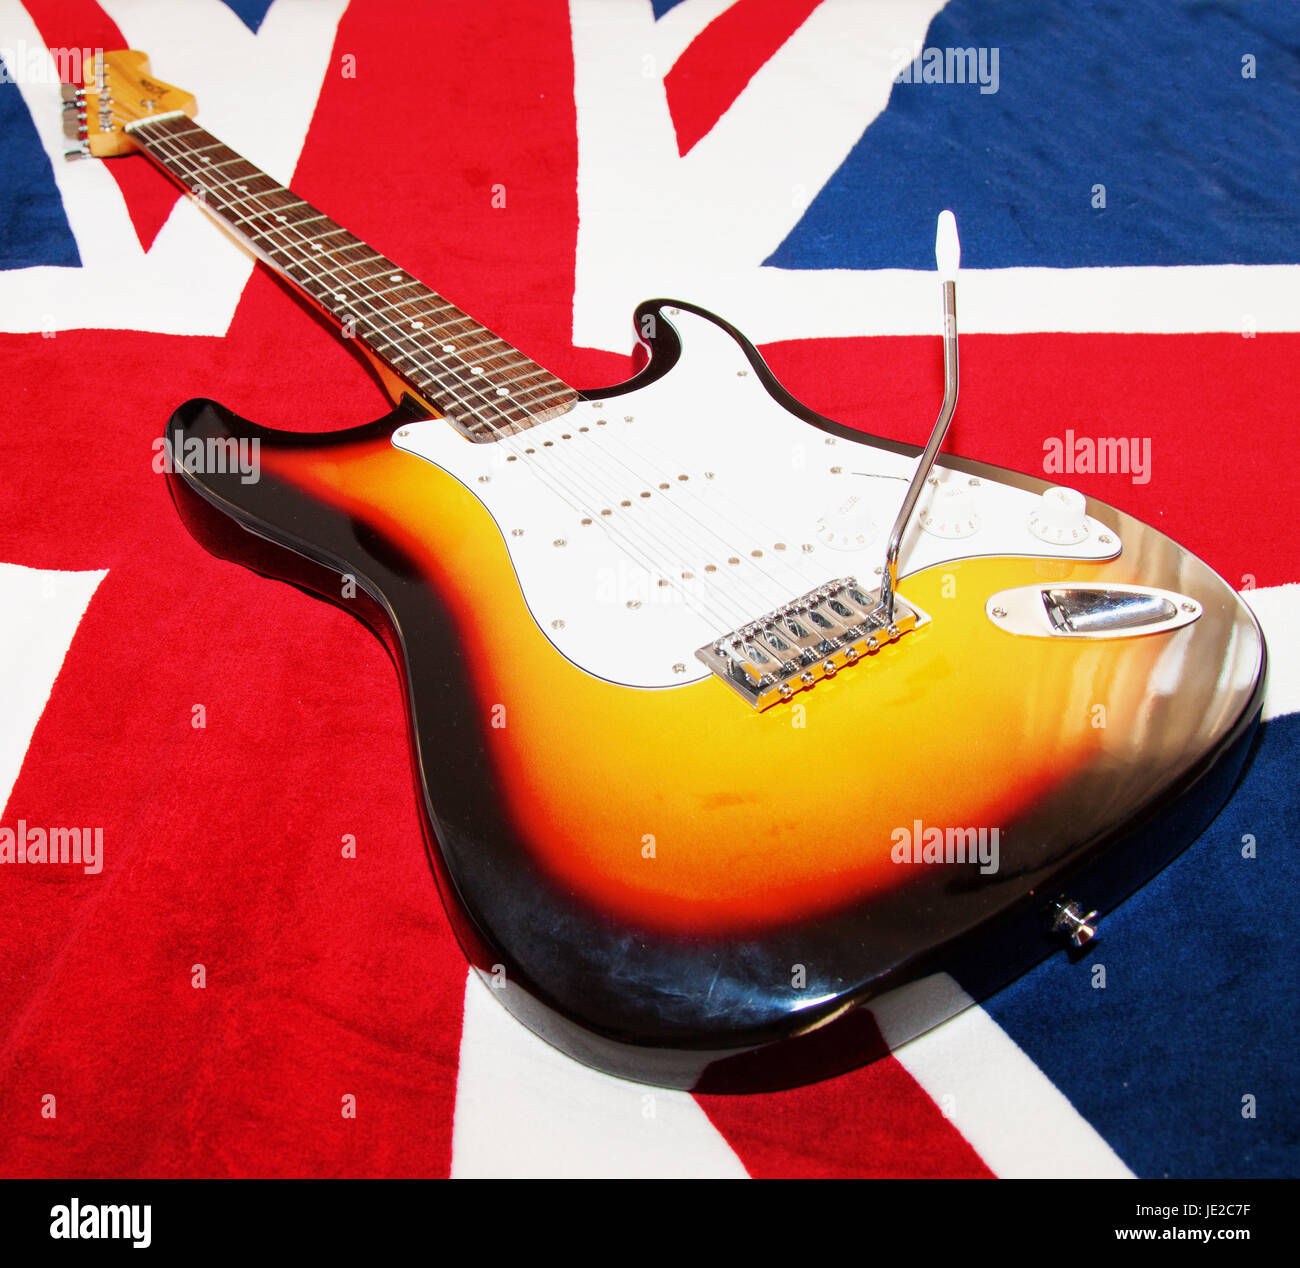 CASALE MONFERRATO, OCTOBER 5, 2014: Vision electric guitar (replica of  Fender Stratocaster) over a UK flag. Fender Stratocaster is one of most  famous and replied guitars in the world, and classic for